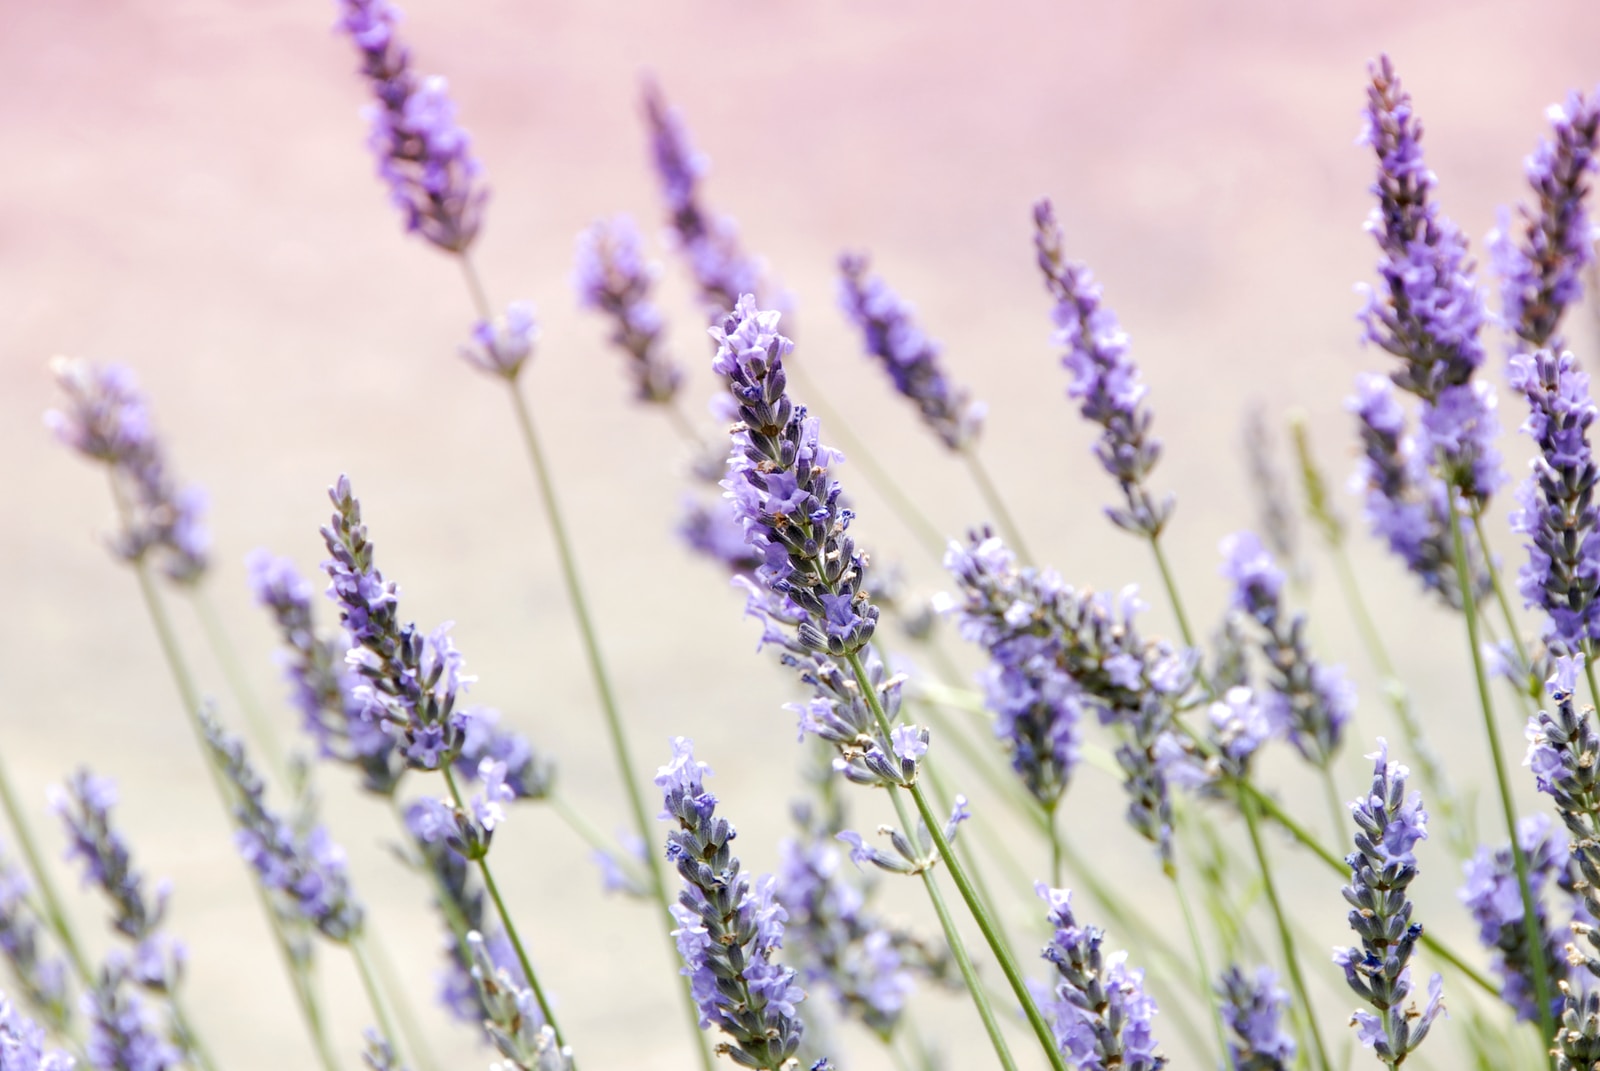 purple petaled flowers, lavender essential oils and their uses